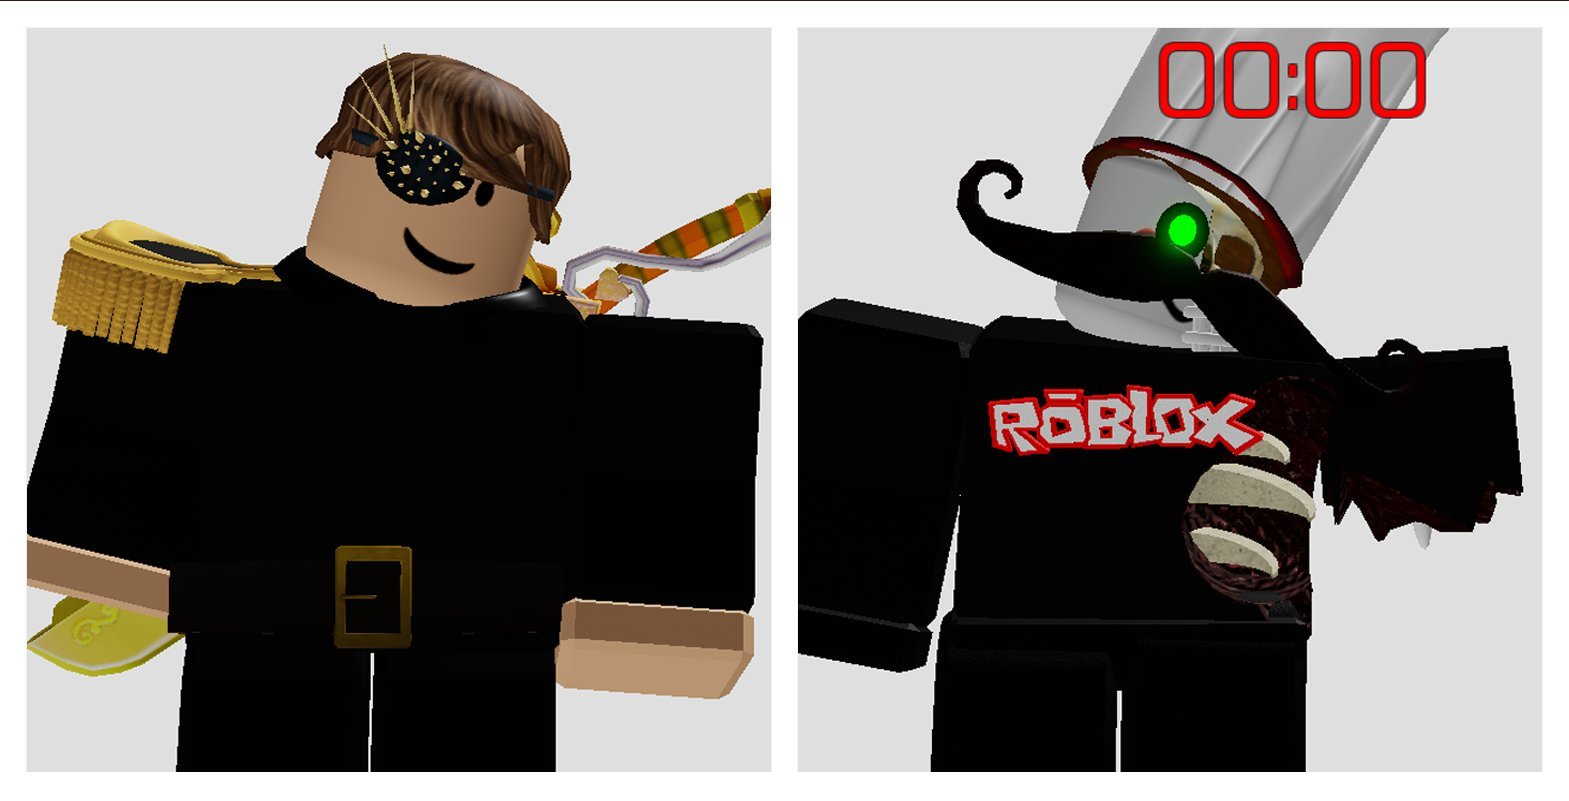 Nahid Drdarkmatter On Twitter Hi This Will Be The Last Weekend To Get Your Hands On The Following Skins Good Luck We Are Aiming To Release A New Bundle As Well - roblox guesty godly skins